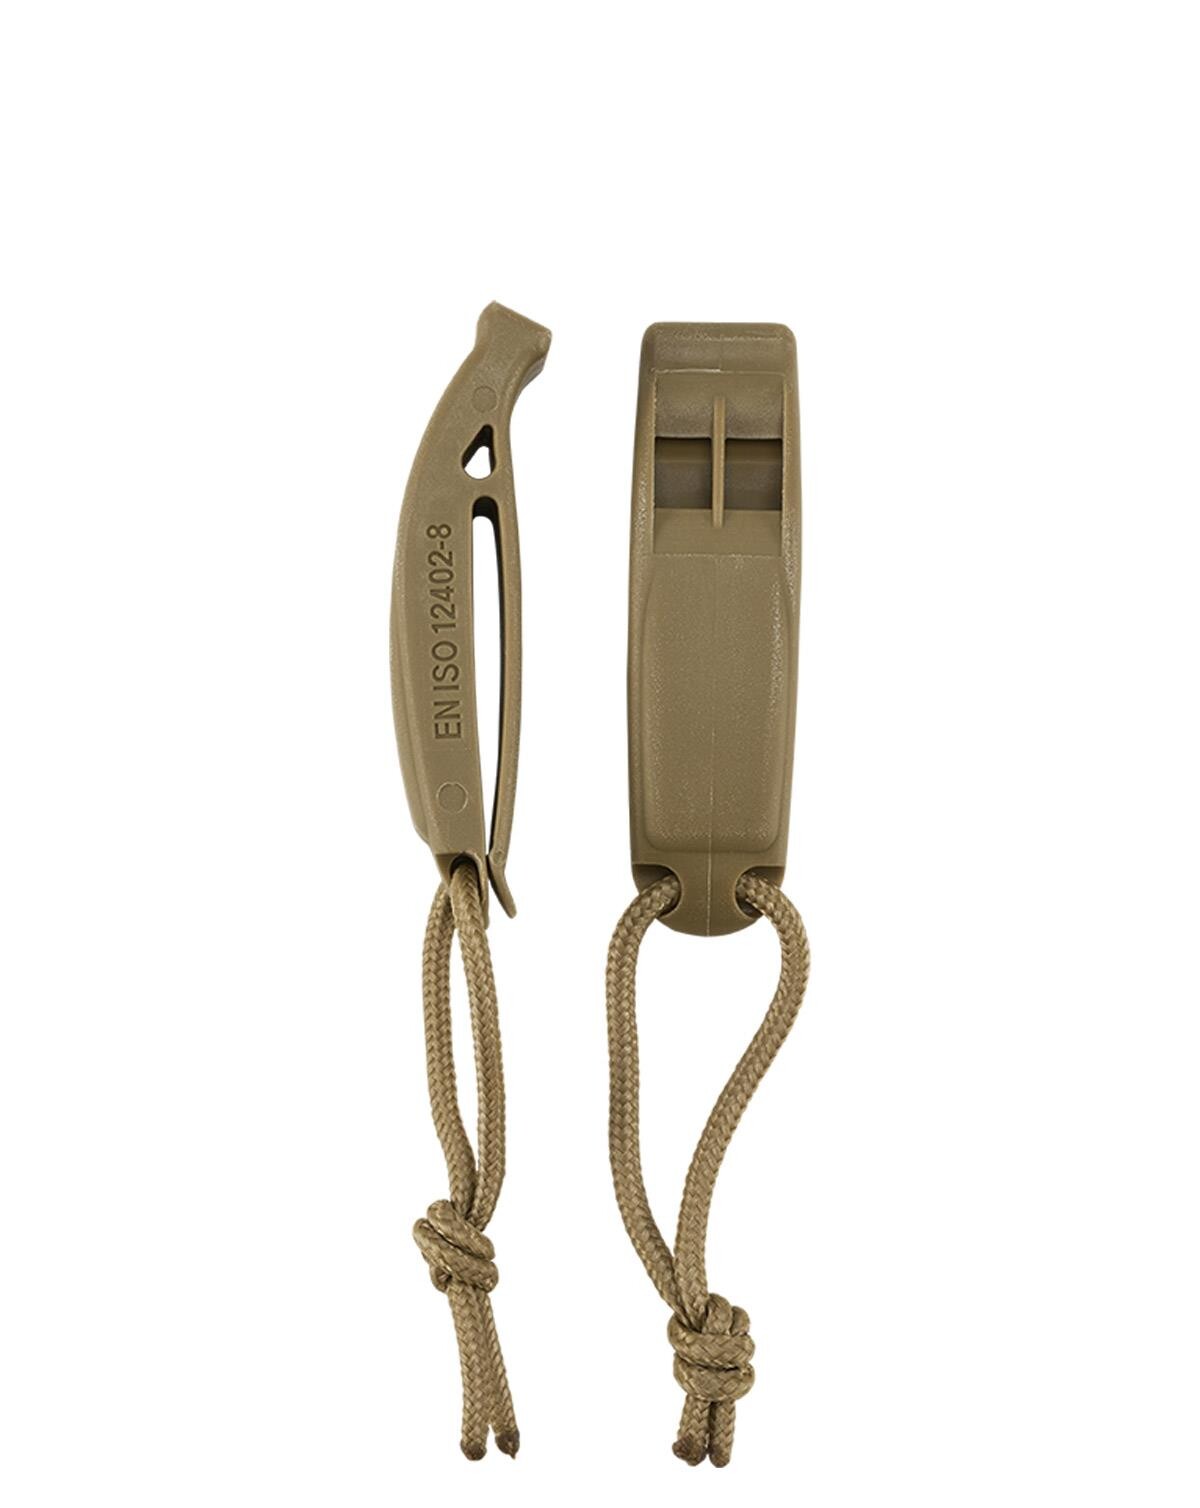 #3 - Brandit Signal Whistle Molle 2 Pack (Camel, One Size)